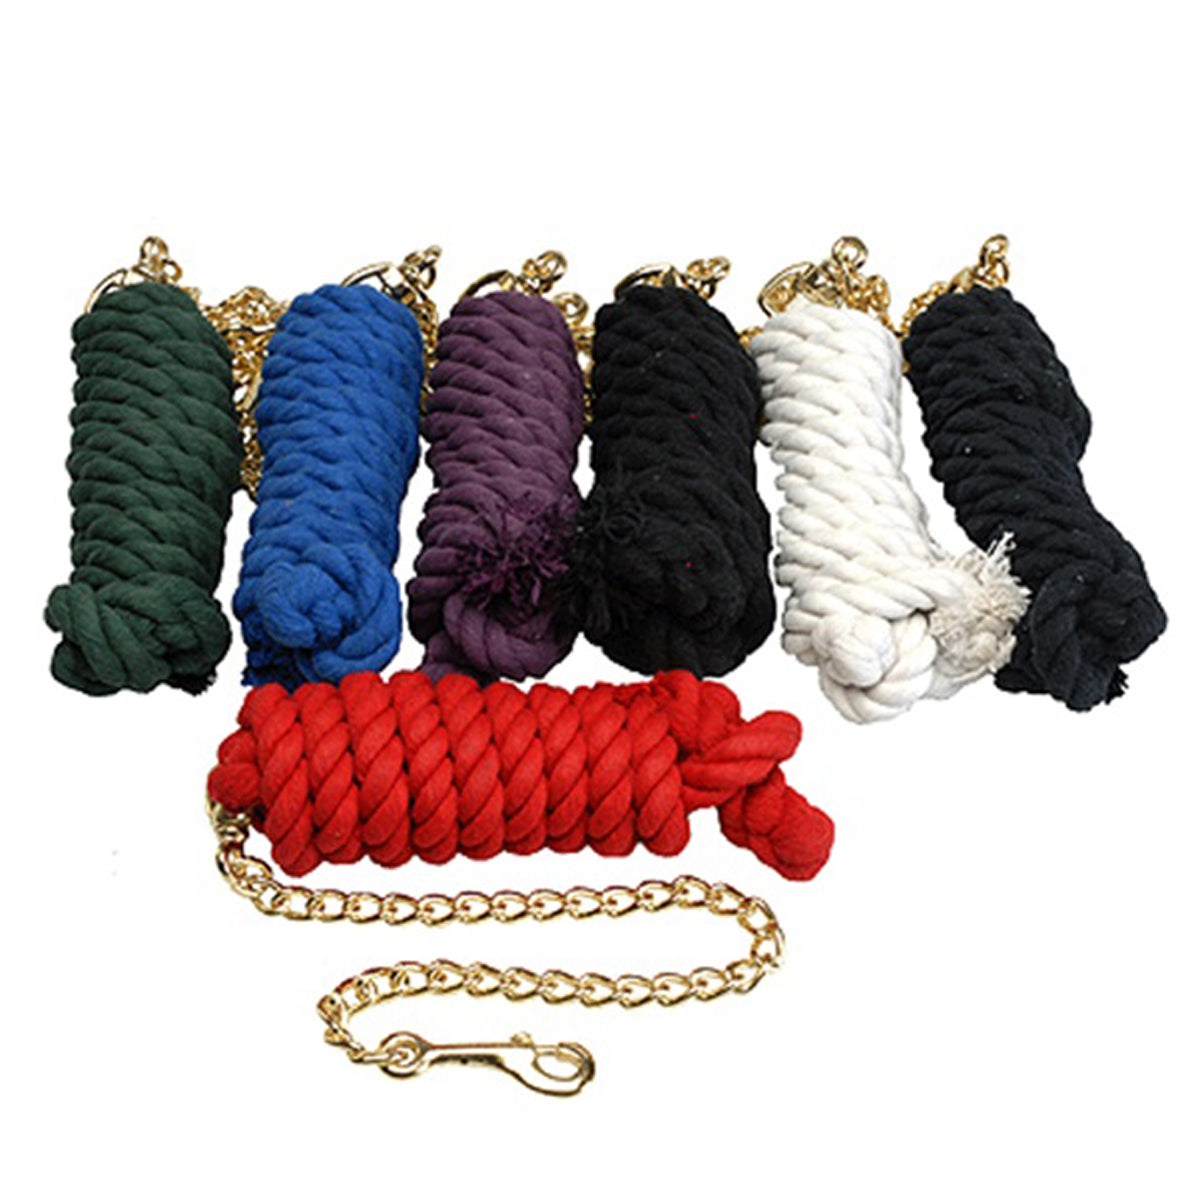 Cotton Lead Rope with Brass Plated Chain and Snap